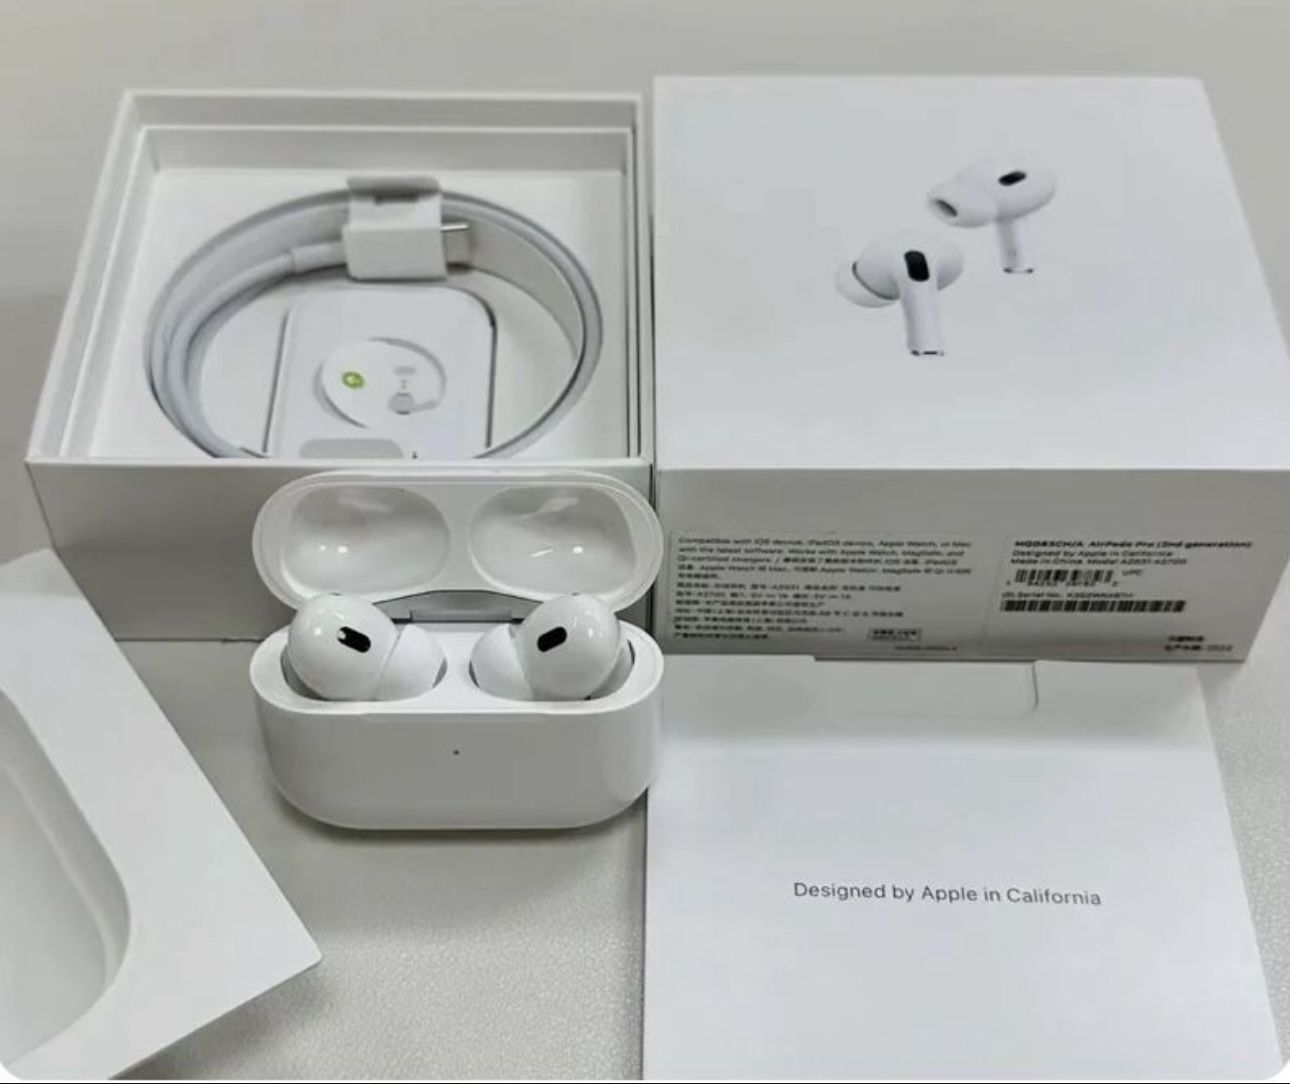 Apple Airpod Pro 2 Minimum $95 MAKE YOUR OWN OFFER